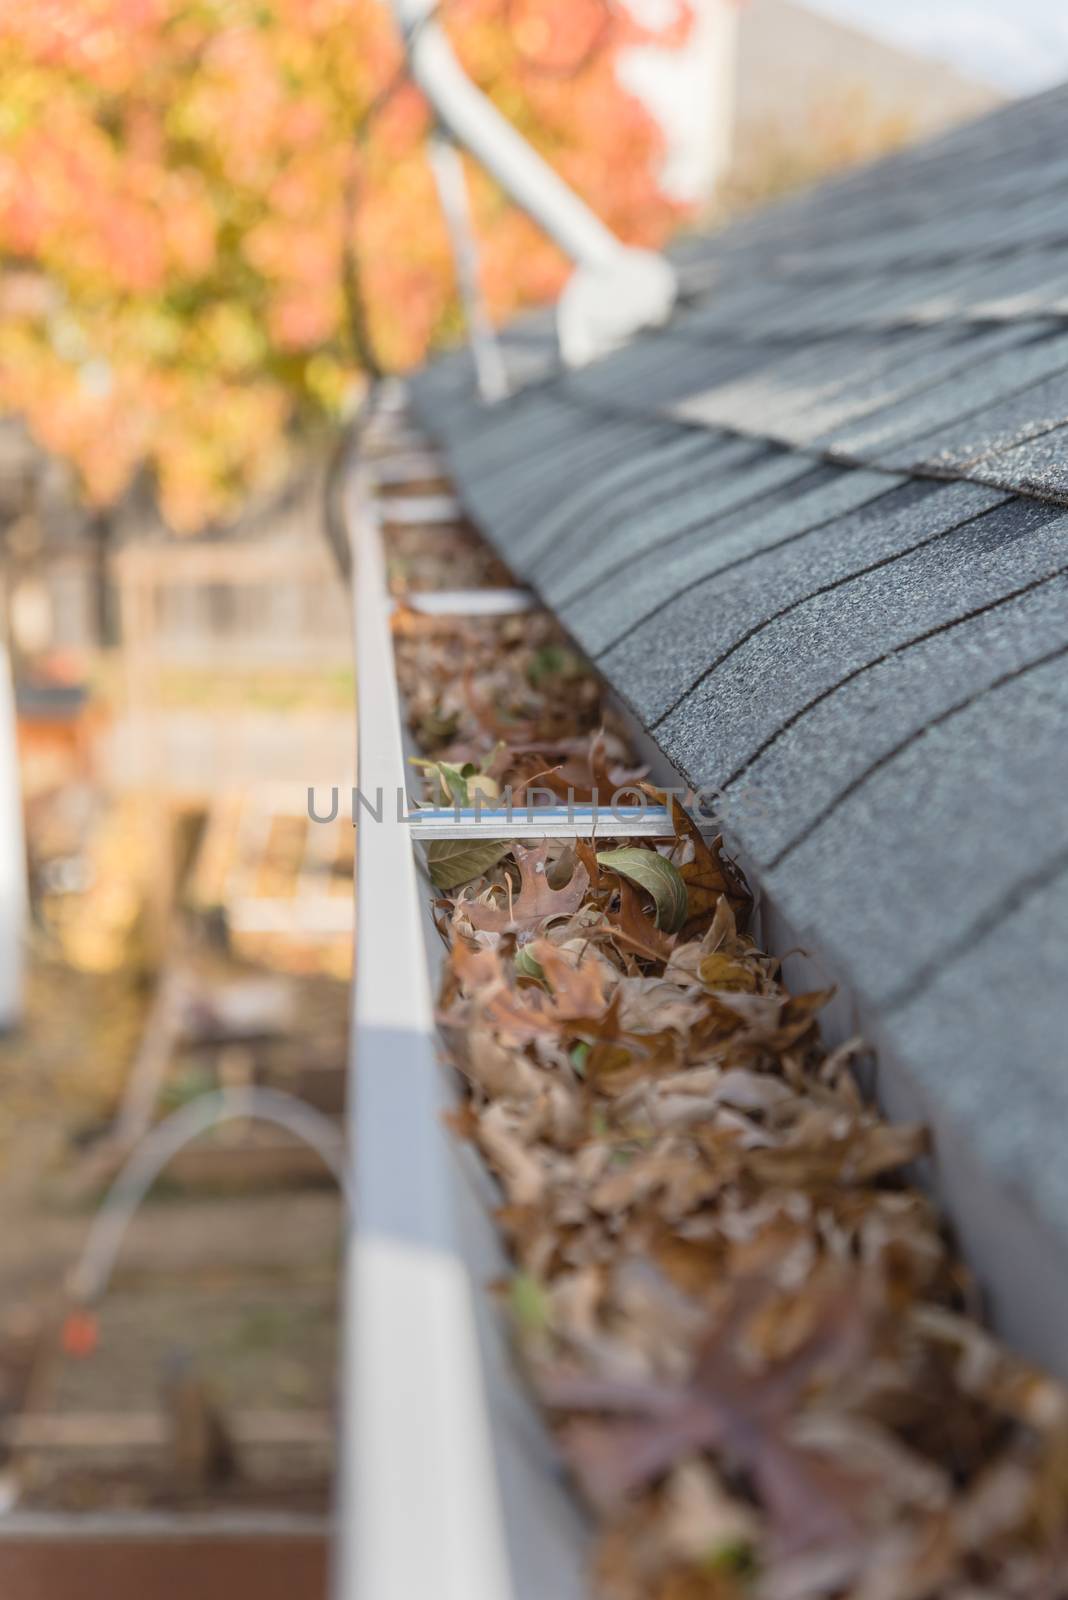 Messy gutter near roof shingles with colorful fall foliage and satellite dish in background. Clogged drain pipe full of dried leaves and dirty need to clean-up. Gutter cleaning, home maintenance concept